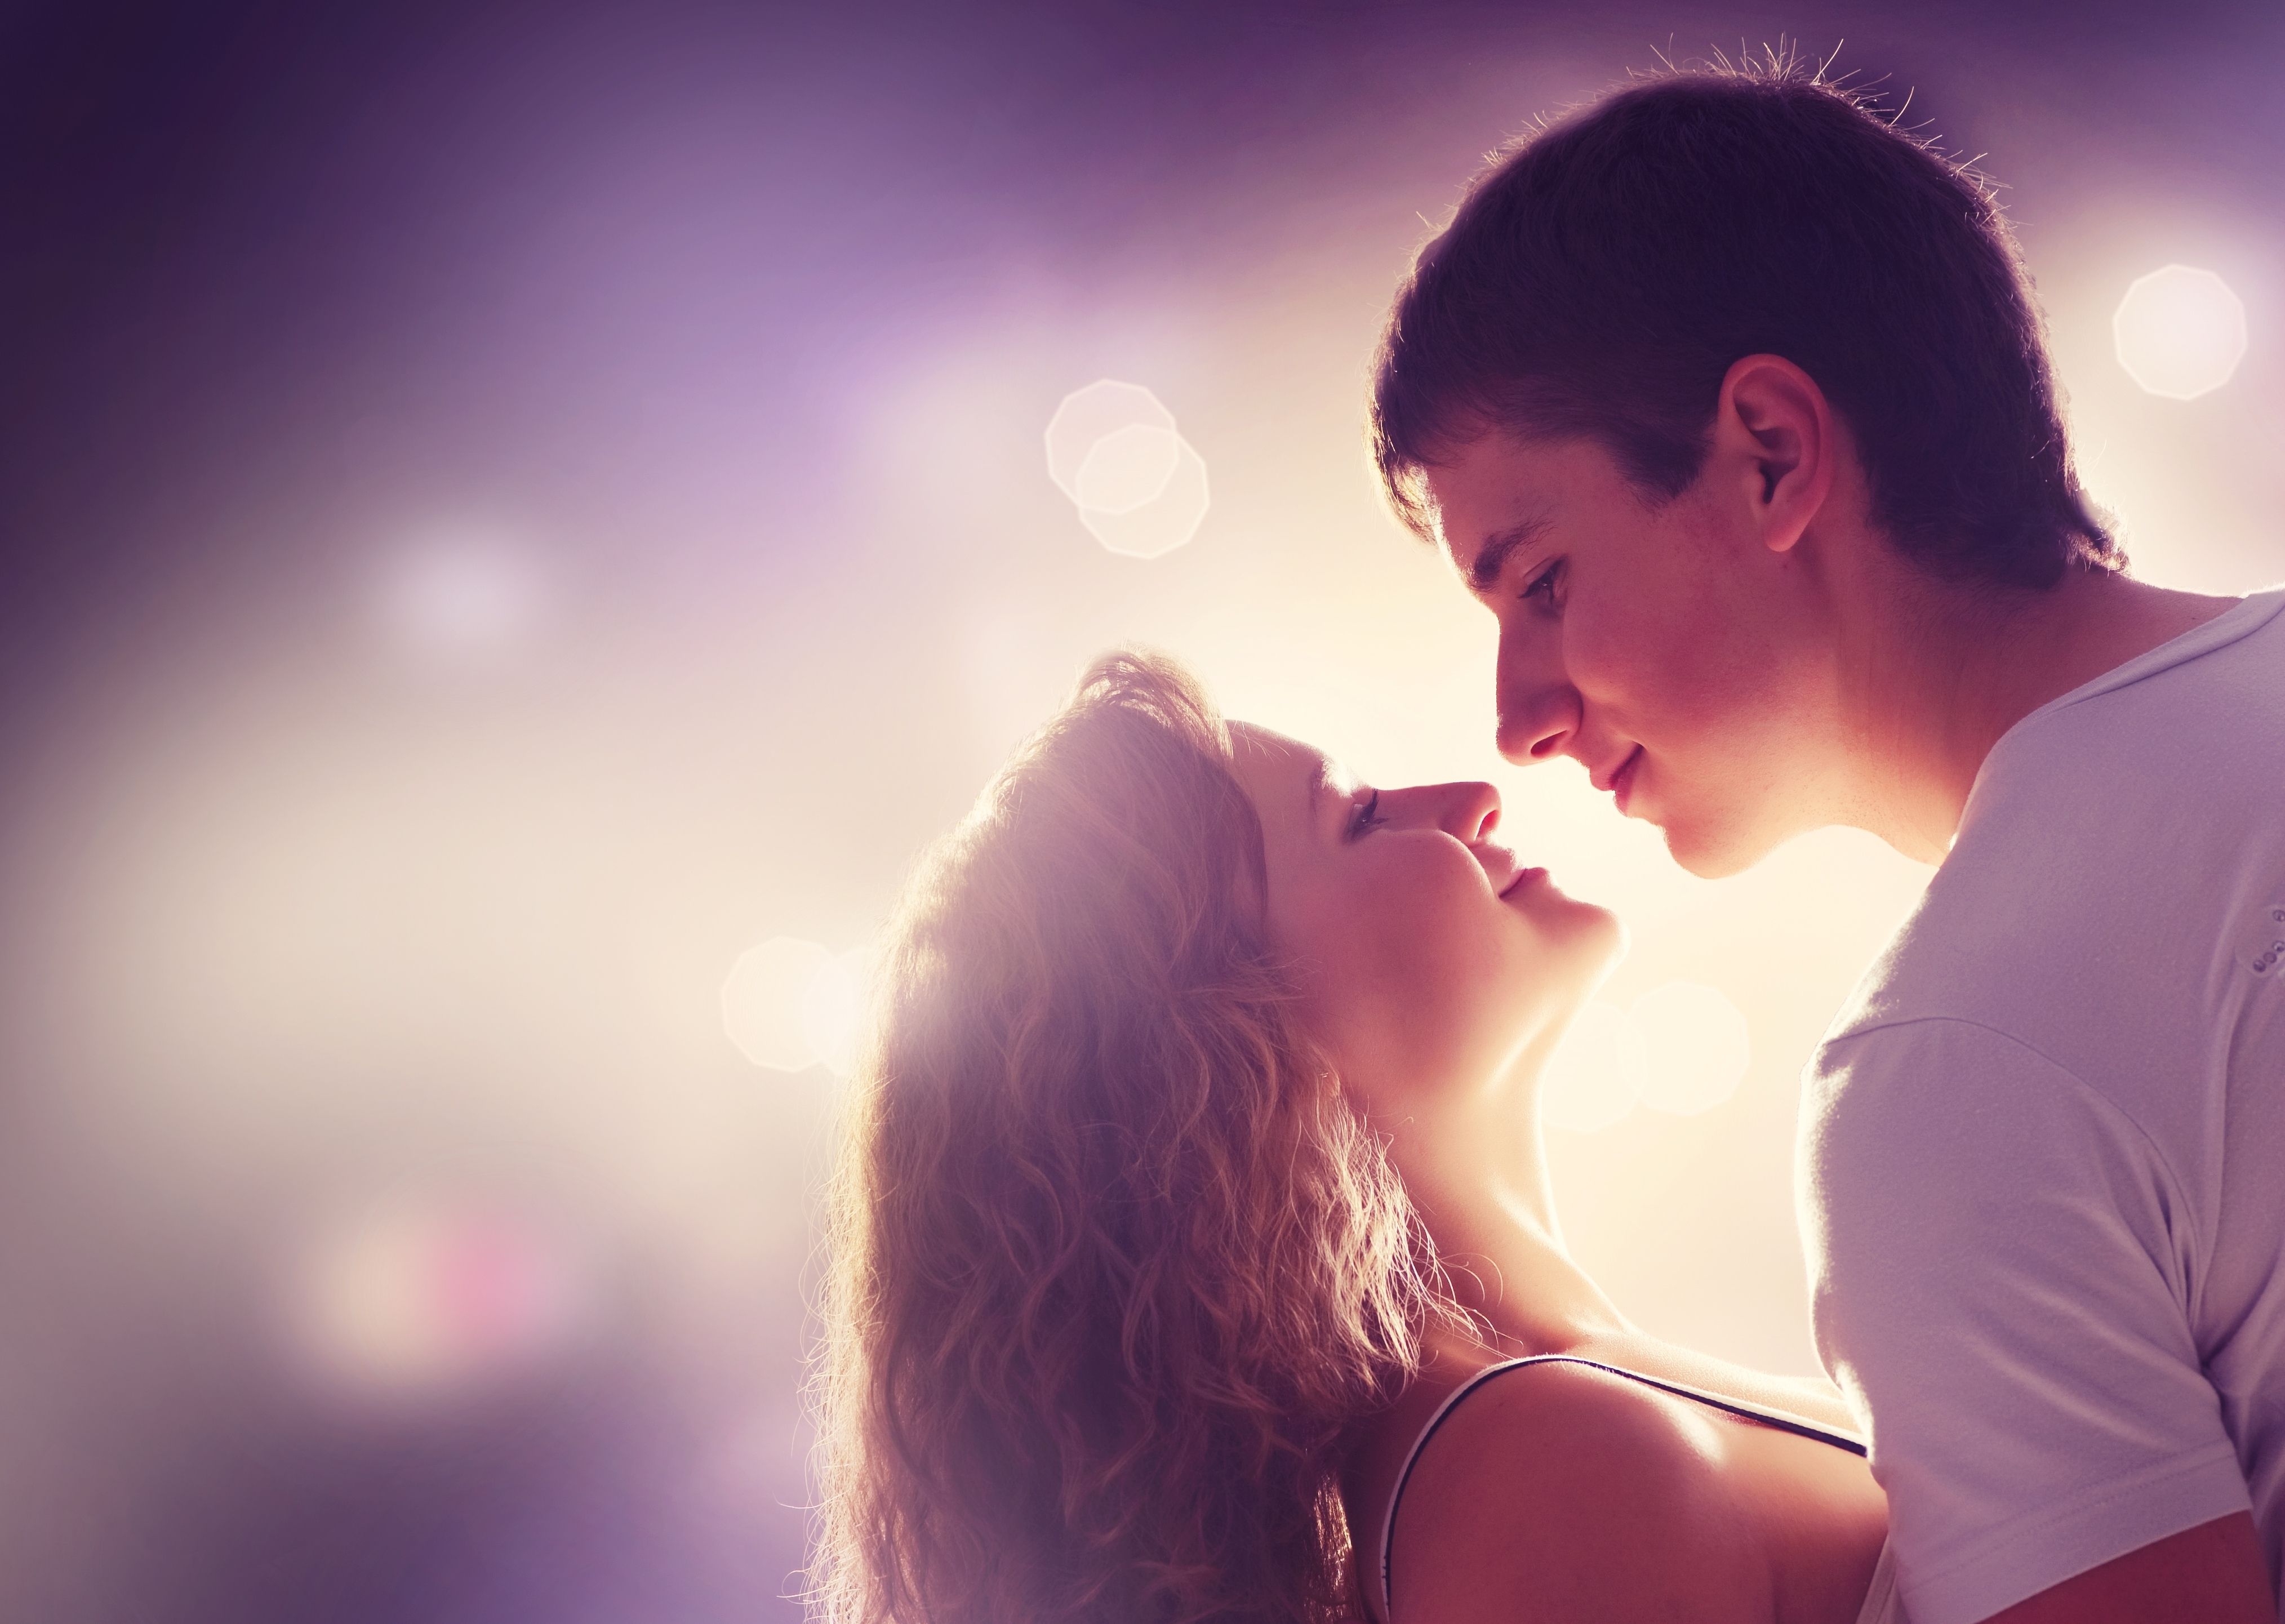 Cute couple, Guy, Girl in love, lovers wallpapers and images